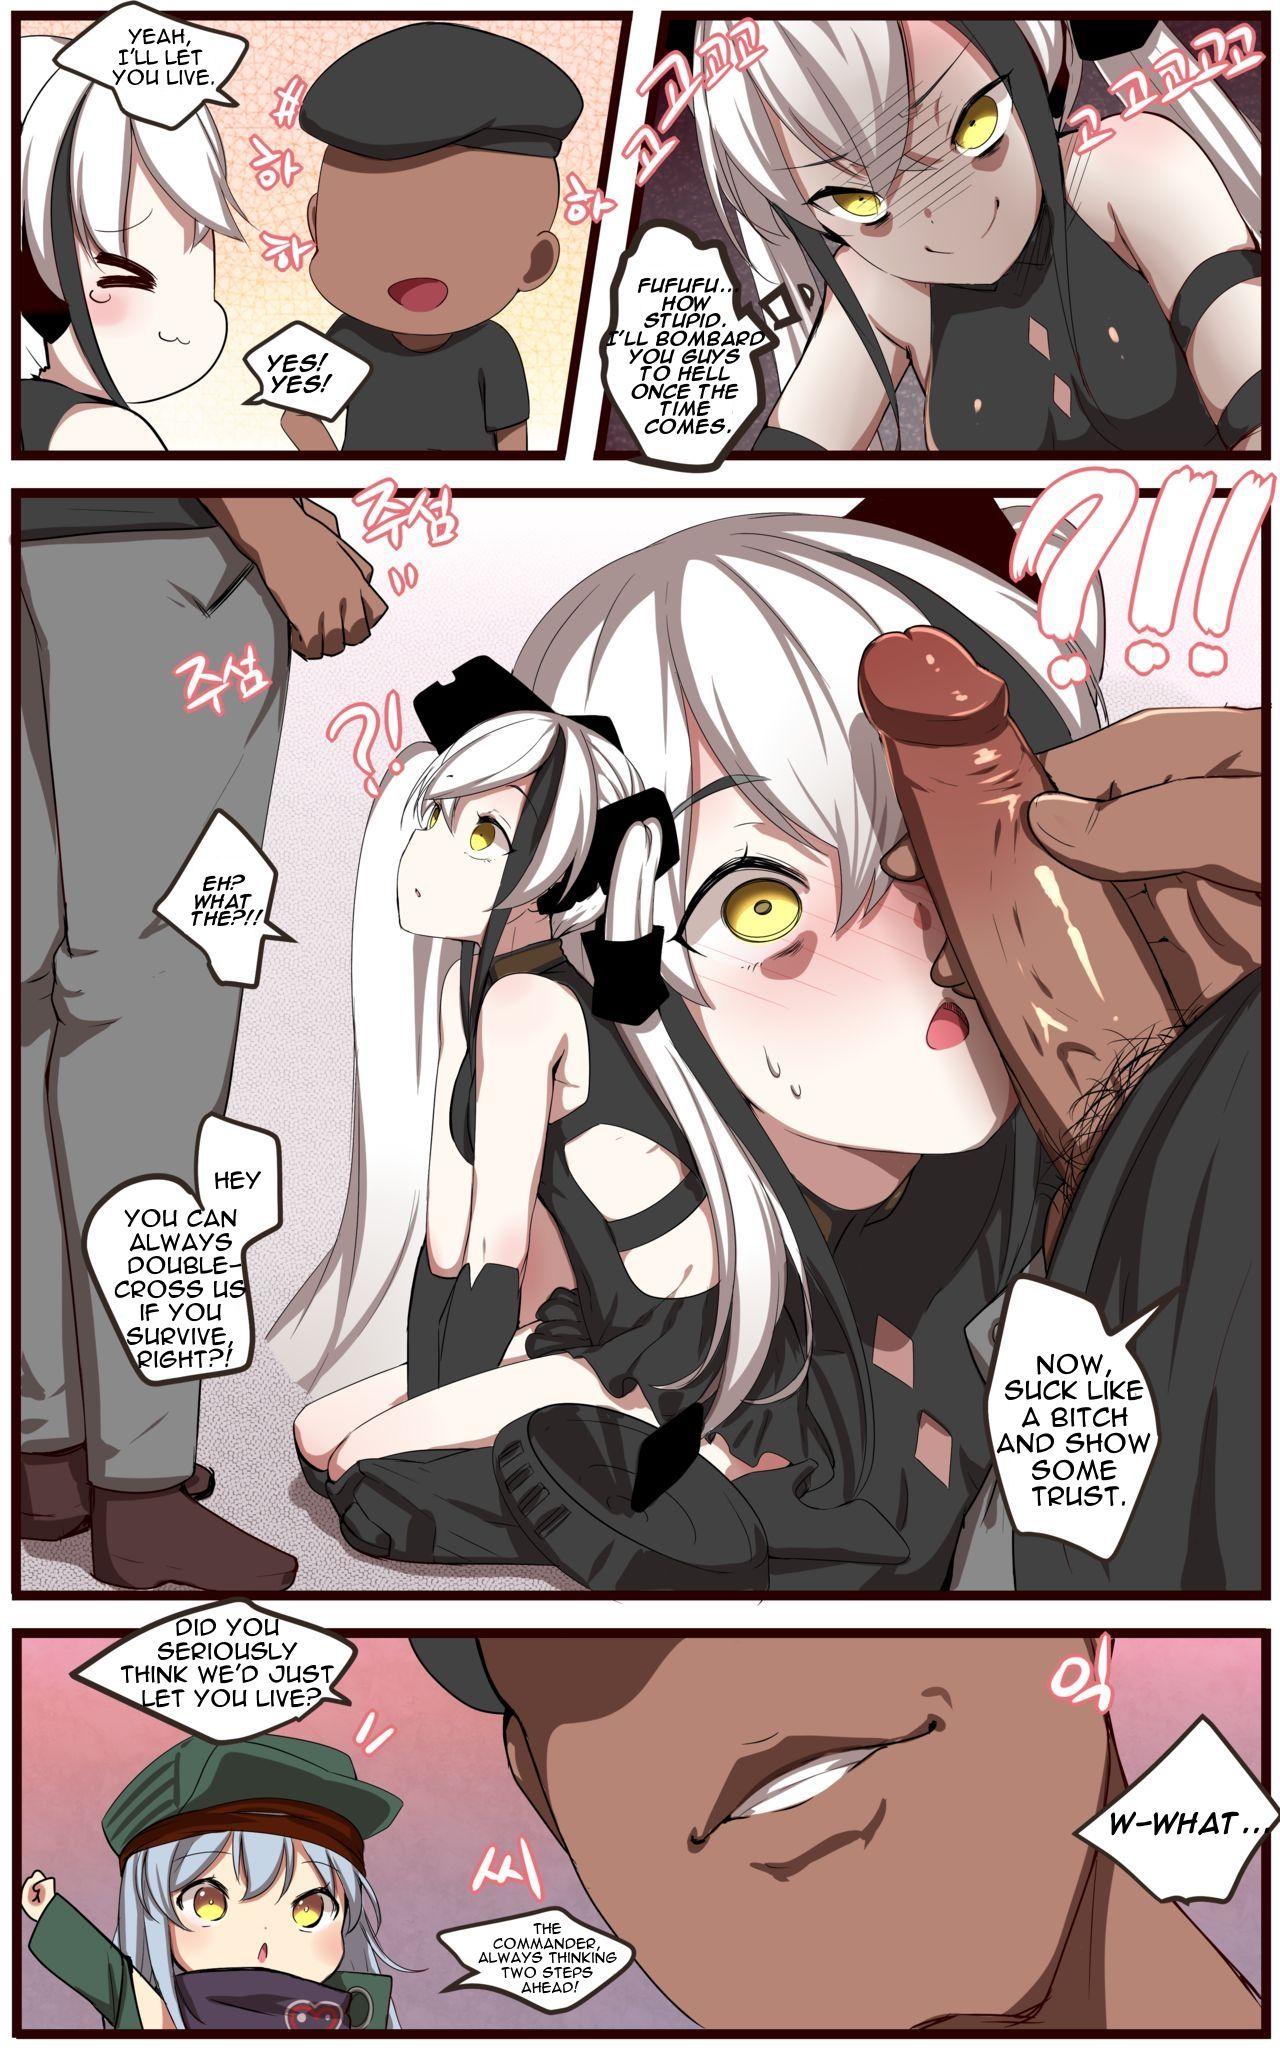 Teen Sex How to use dolls 06 - Girls frontline Uncut - Page 4